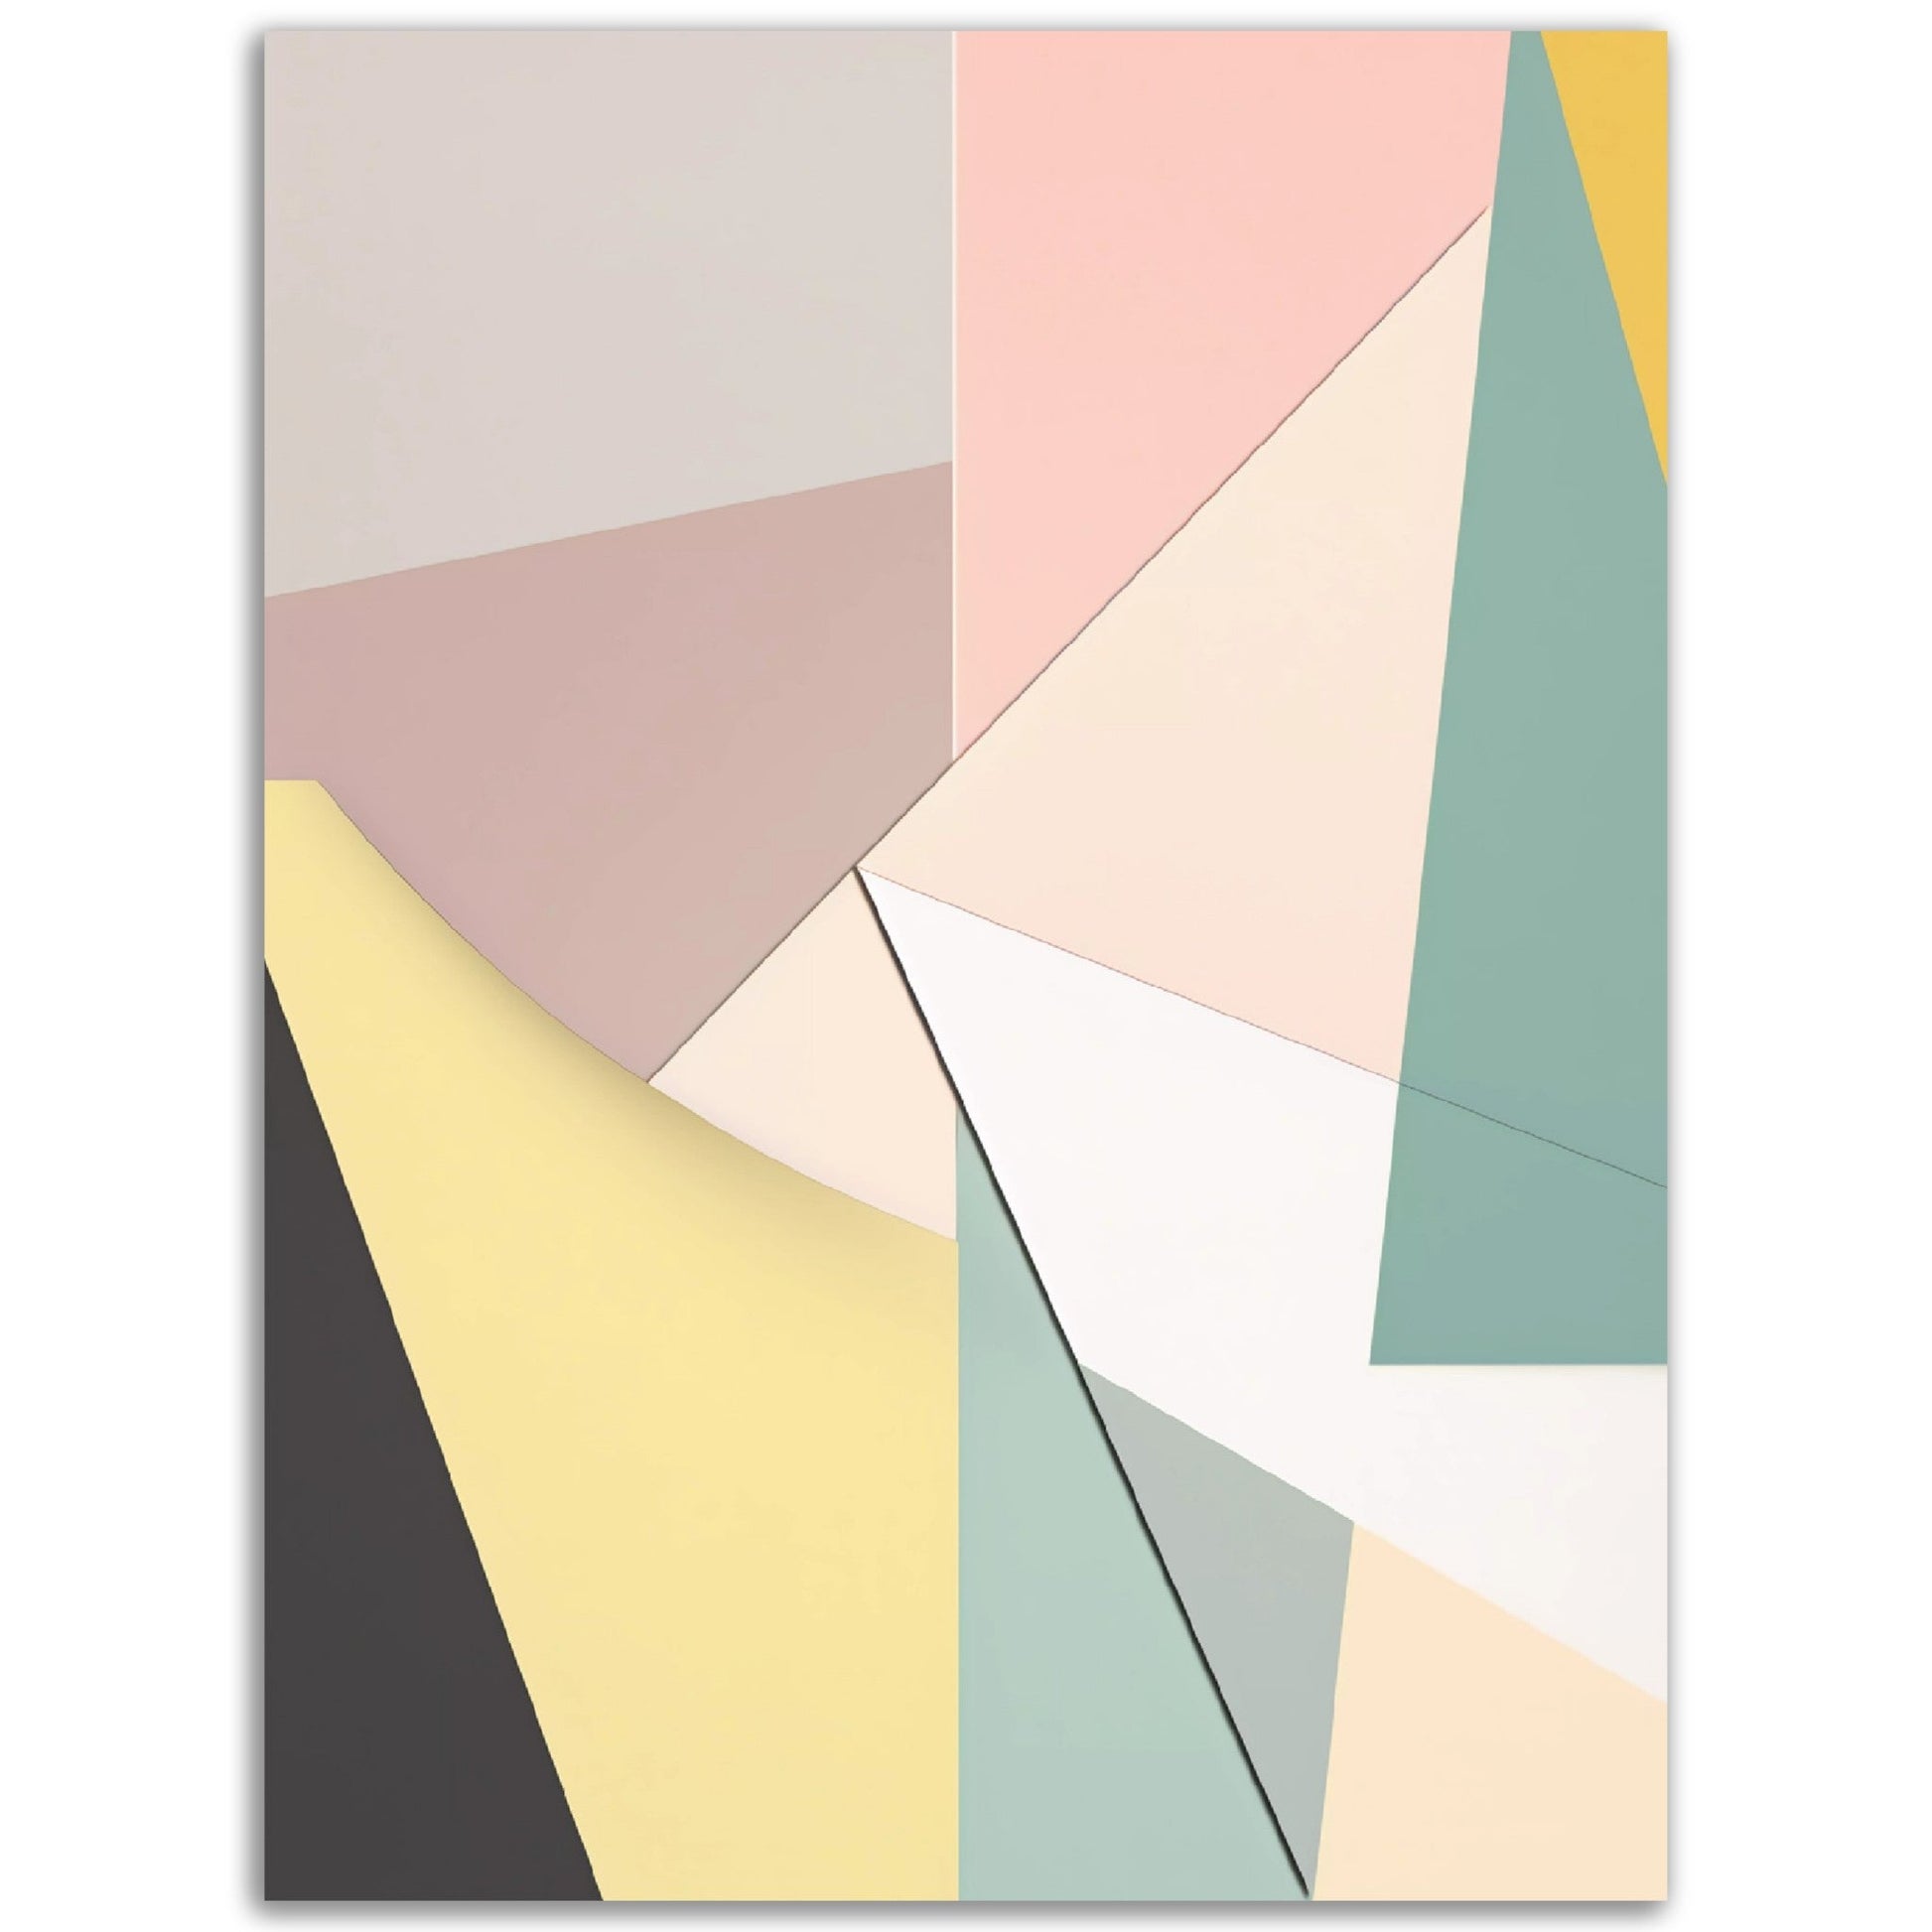 A Minimal Folded Abstraction painting with geometric shapes on a white background, perfect for posters for room decor or colored wall art.